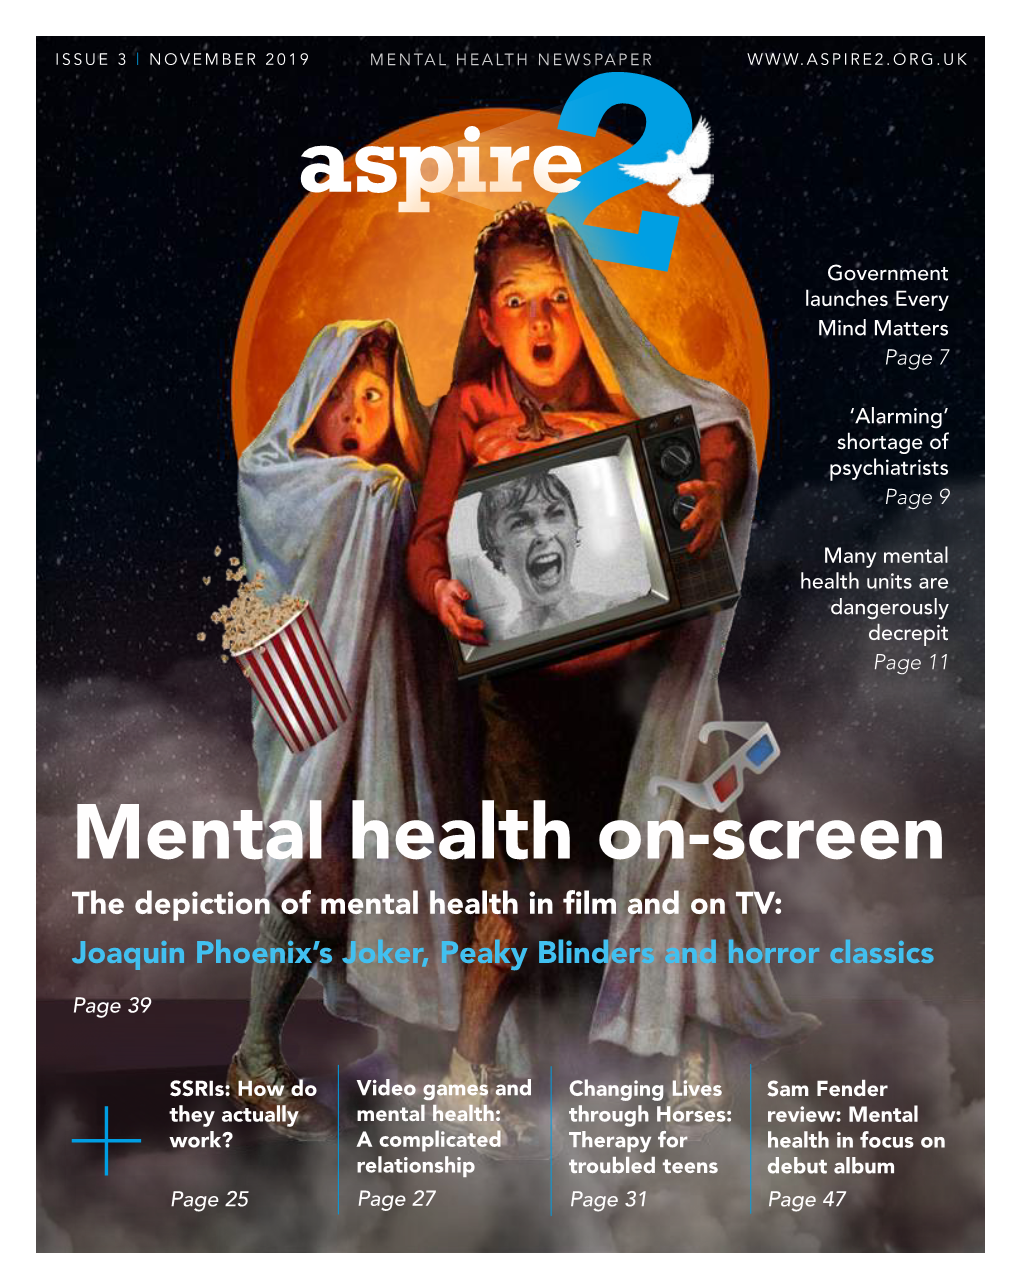 Mental Health On-Screen the Depiction of Mental Health in Film and on TV: Joaquin Phoenix’S Joker, Peaky Blinders and Horror Classics Page 39